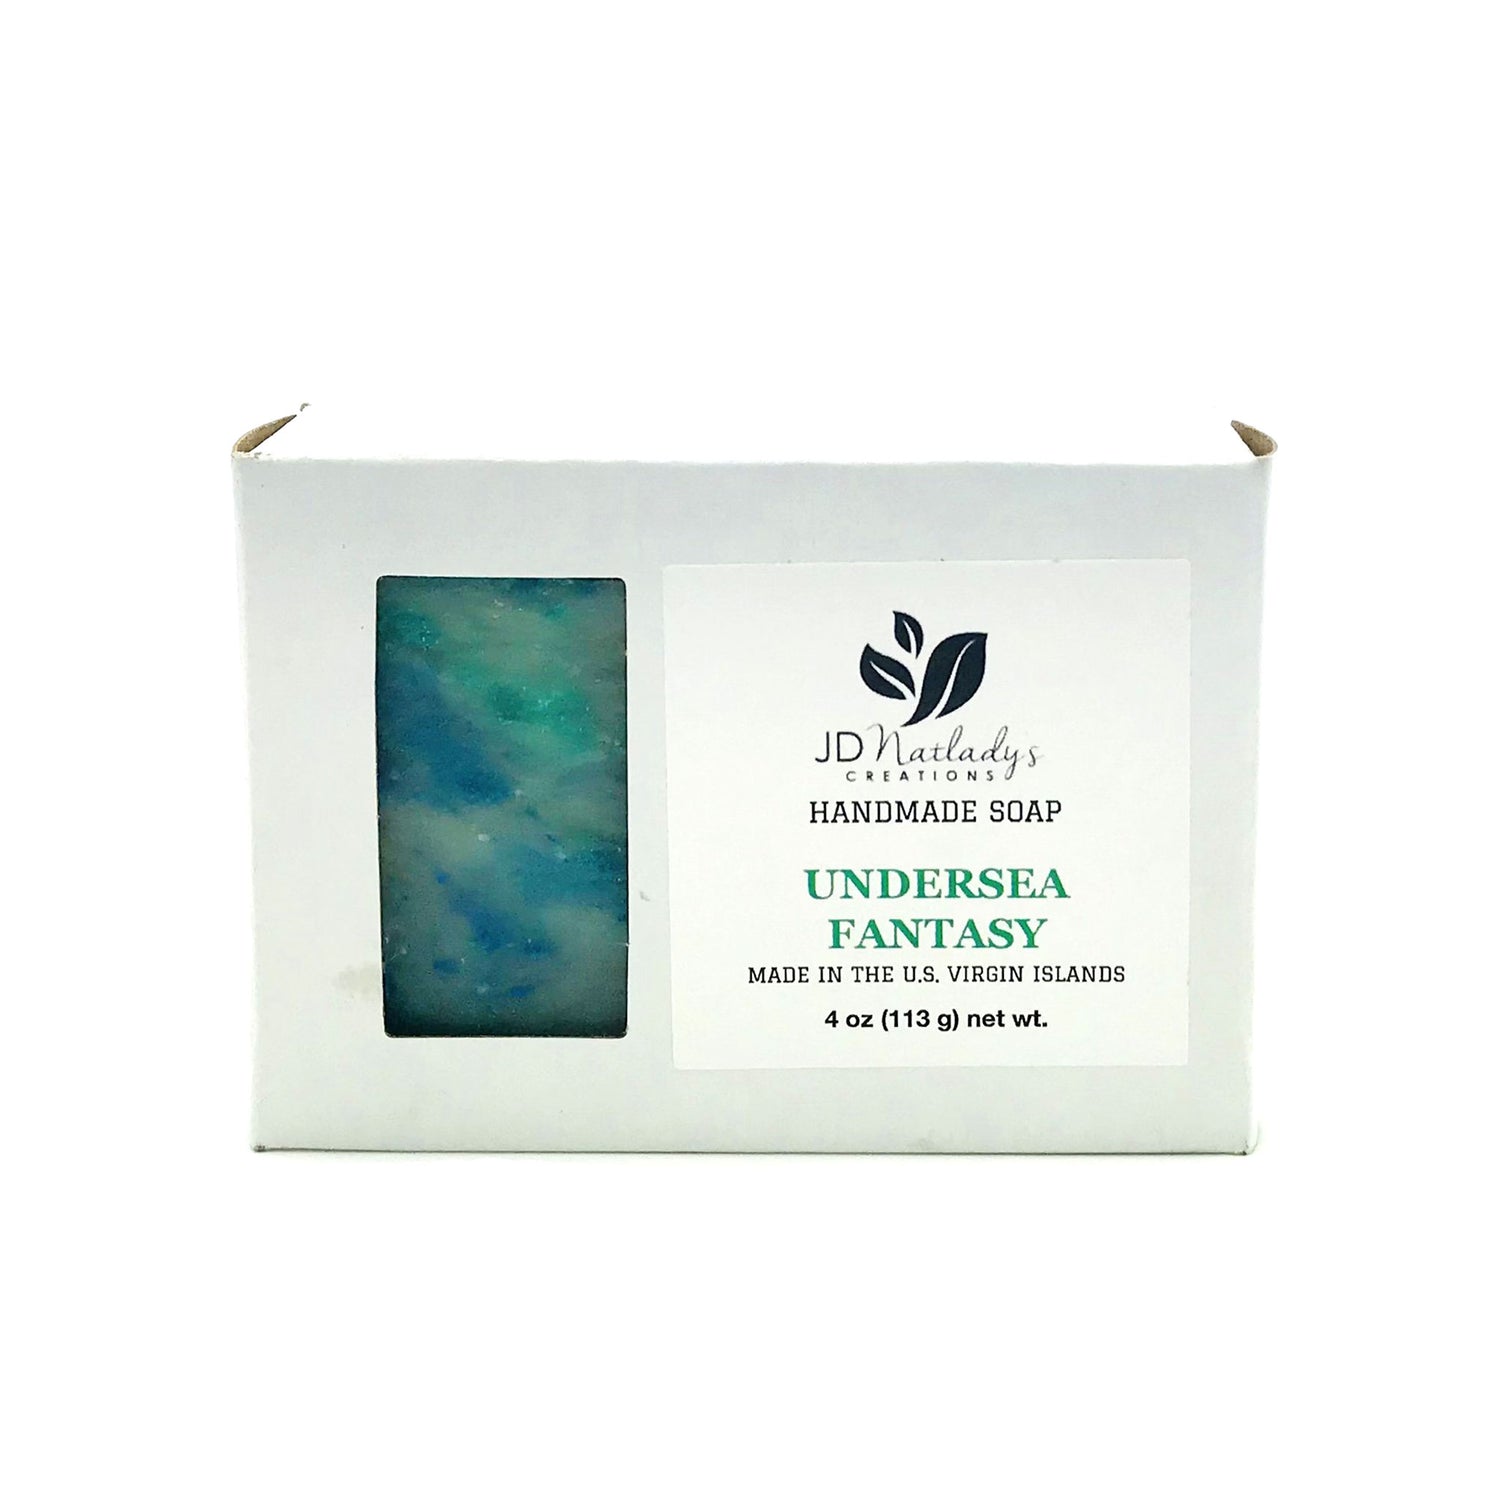 Ocean themed handmade scented bar soap at JDNatlady's Creations